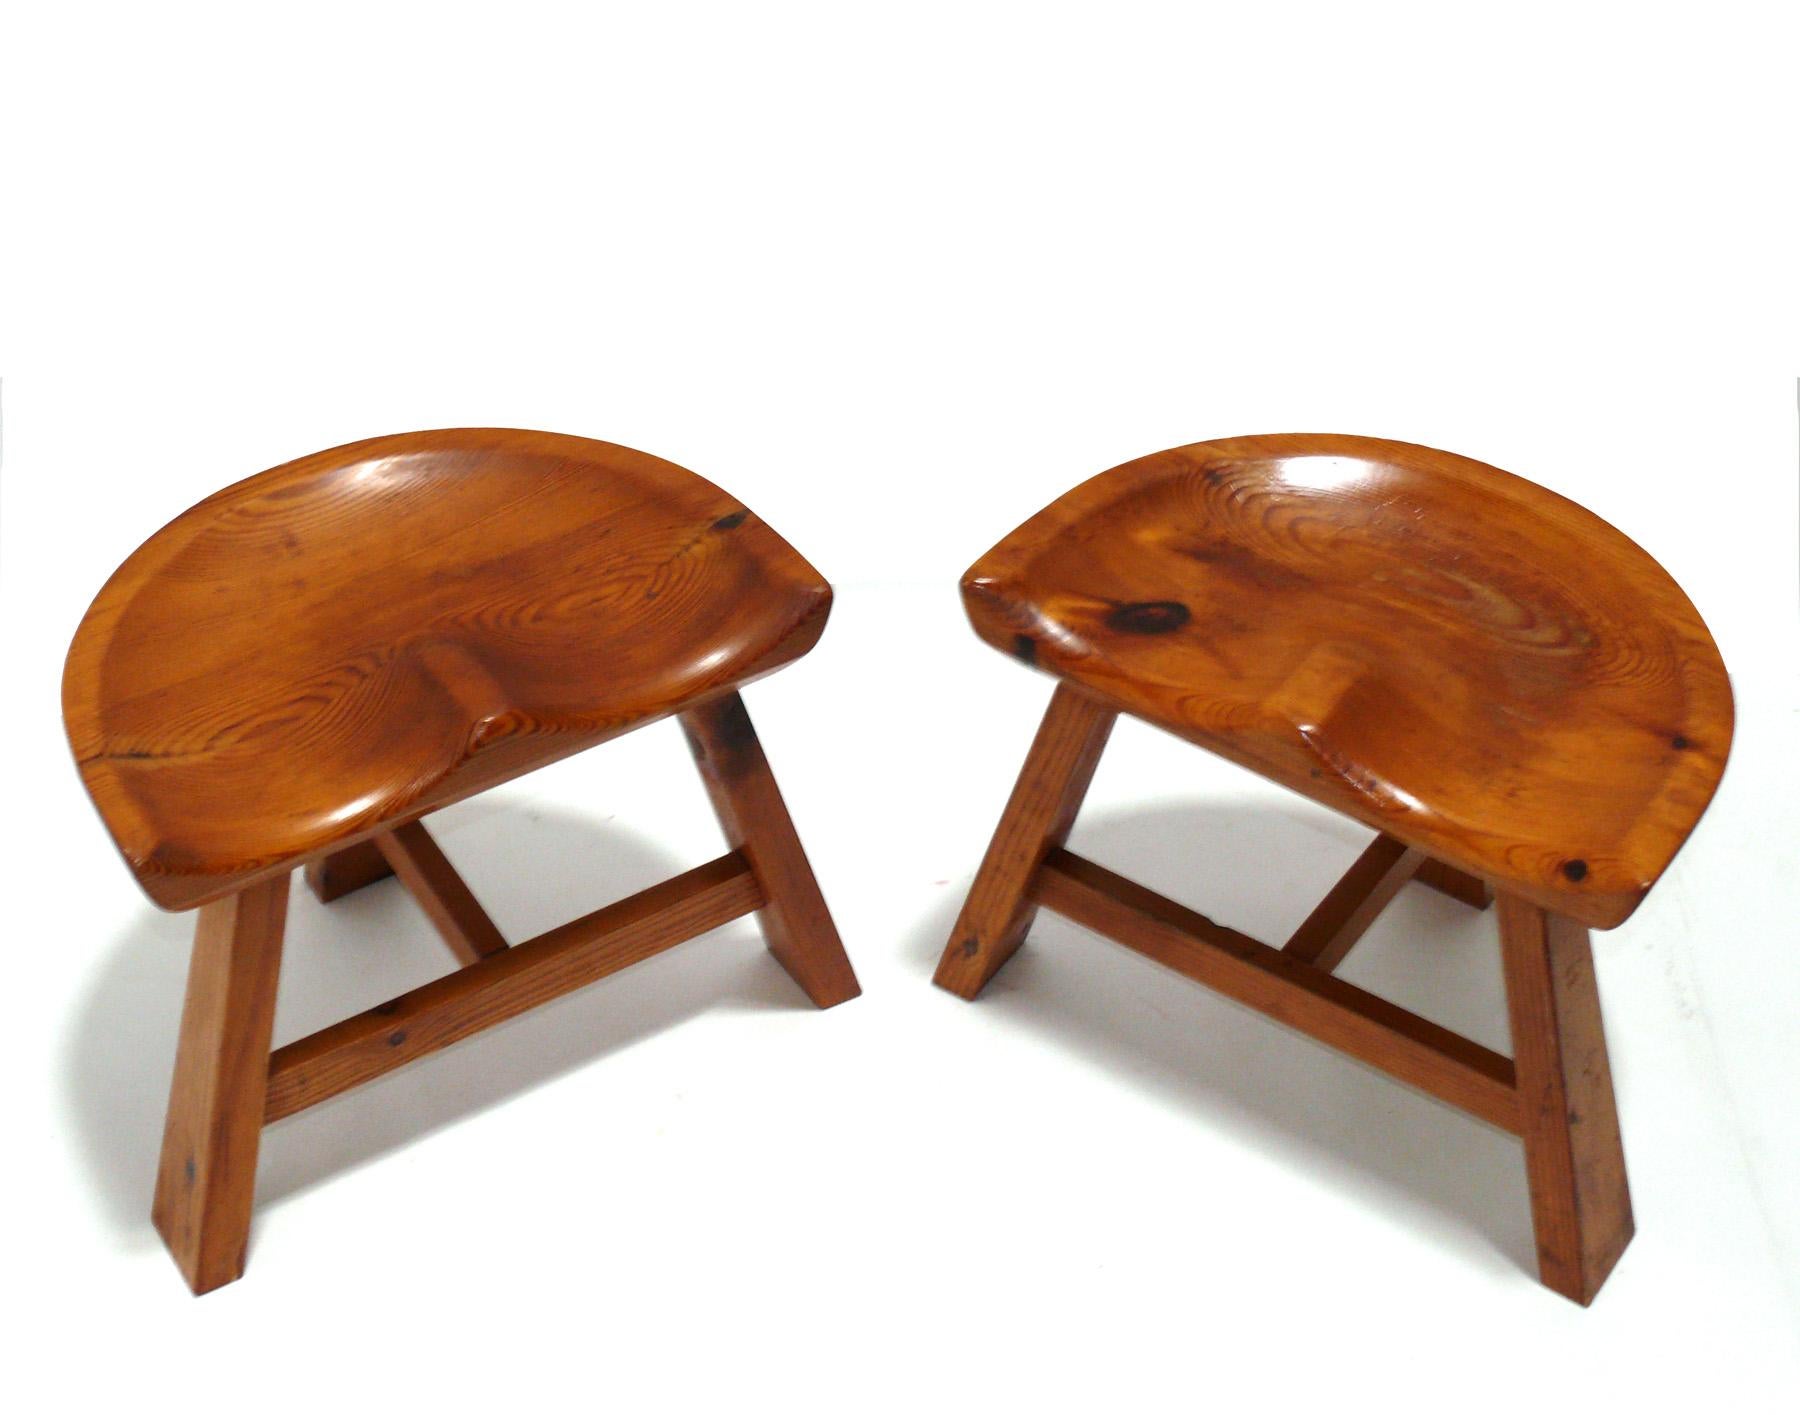 Selection of Curvaceous stools, in the manner of Charlotte Perriand, probably American, circa 1960s. They retain their warm original patina. They are priced at $850 each or $1500 for the pair.